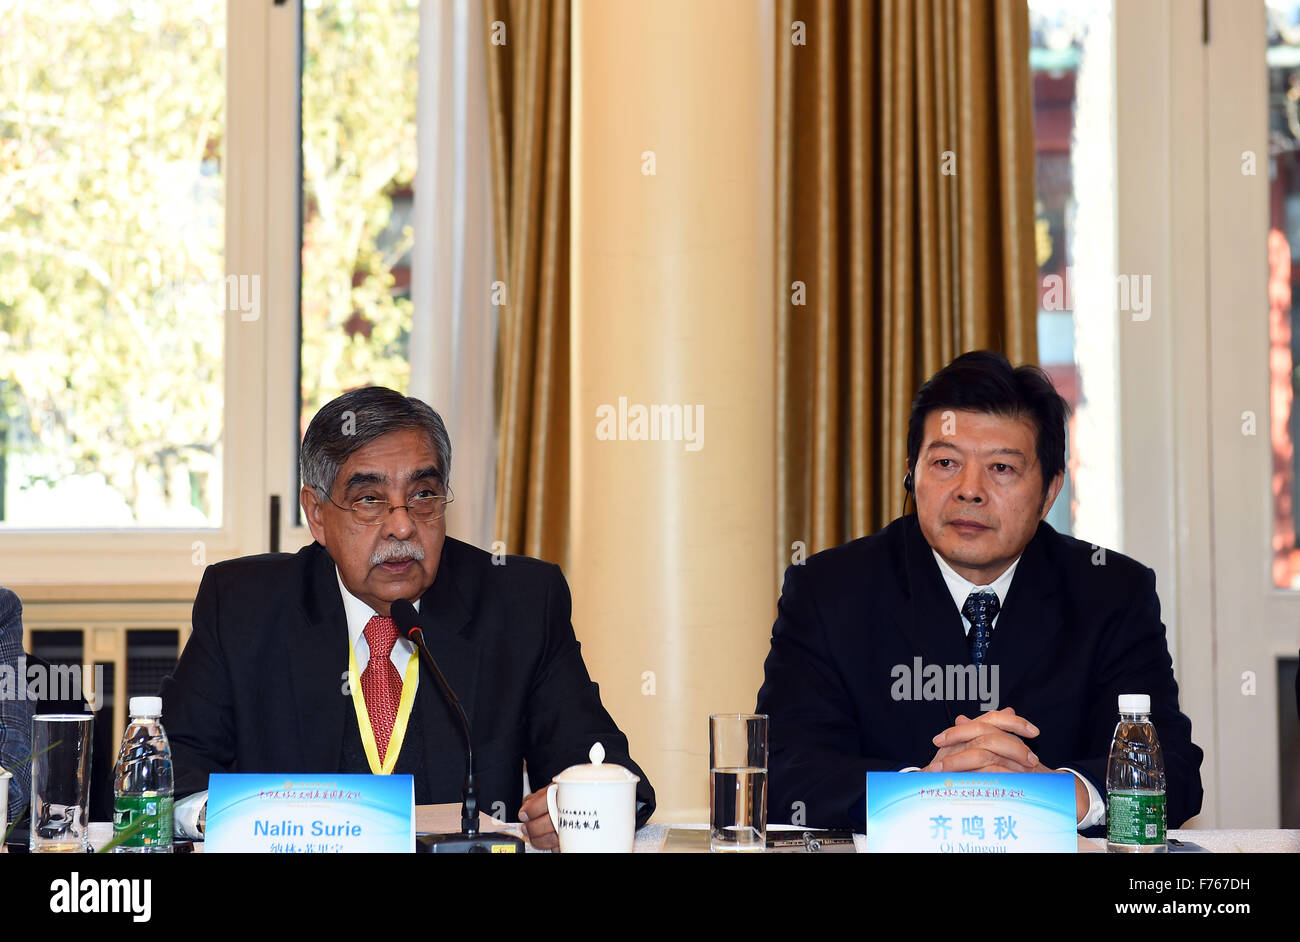 (151126) -- BEIJING, Nov. 26, 2015 (Xinhua) -- Nalin Surie (L), director general of the Indian Council of World Affairs, and Qi Mingqiu, vice chairperson of China Soong Ching Ling Foundation, attend the China-India Friendship and Inter-Civilization Exchanges Roundtable Conference in Beijing, capital of China, Nov. 26, 2015. The conference was held to mark the 65th anniversary of the establishment of the diplomatic relations between China and India. (Xinhua/Jin Liangkuai) (ry) Stock Photo